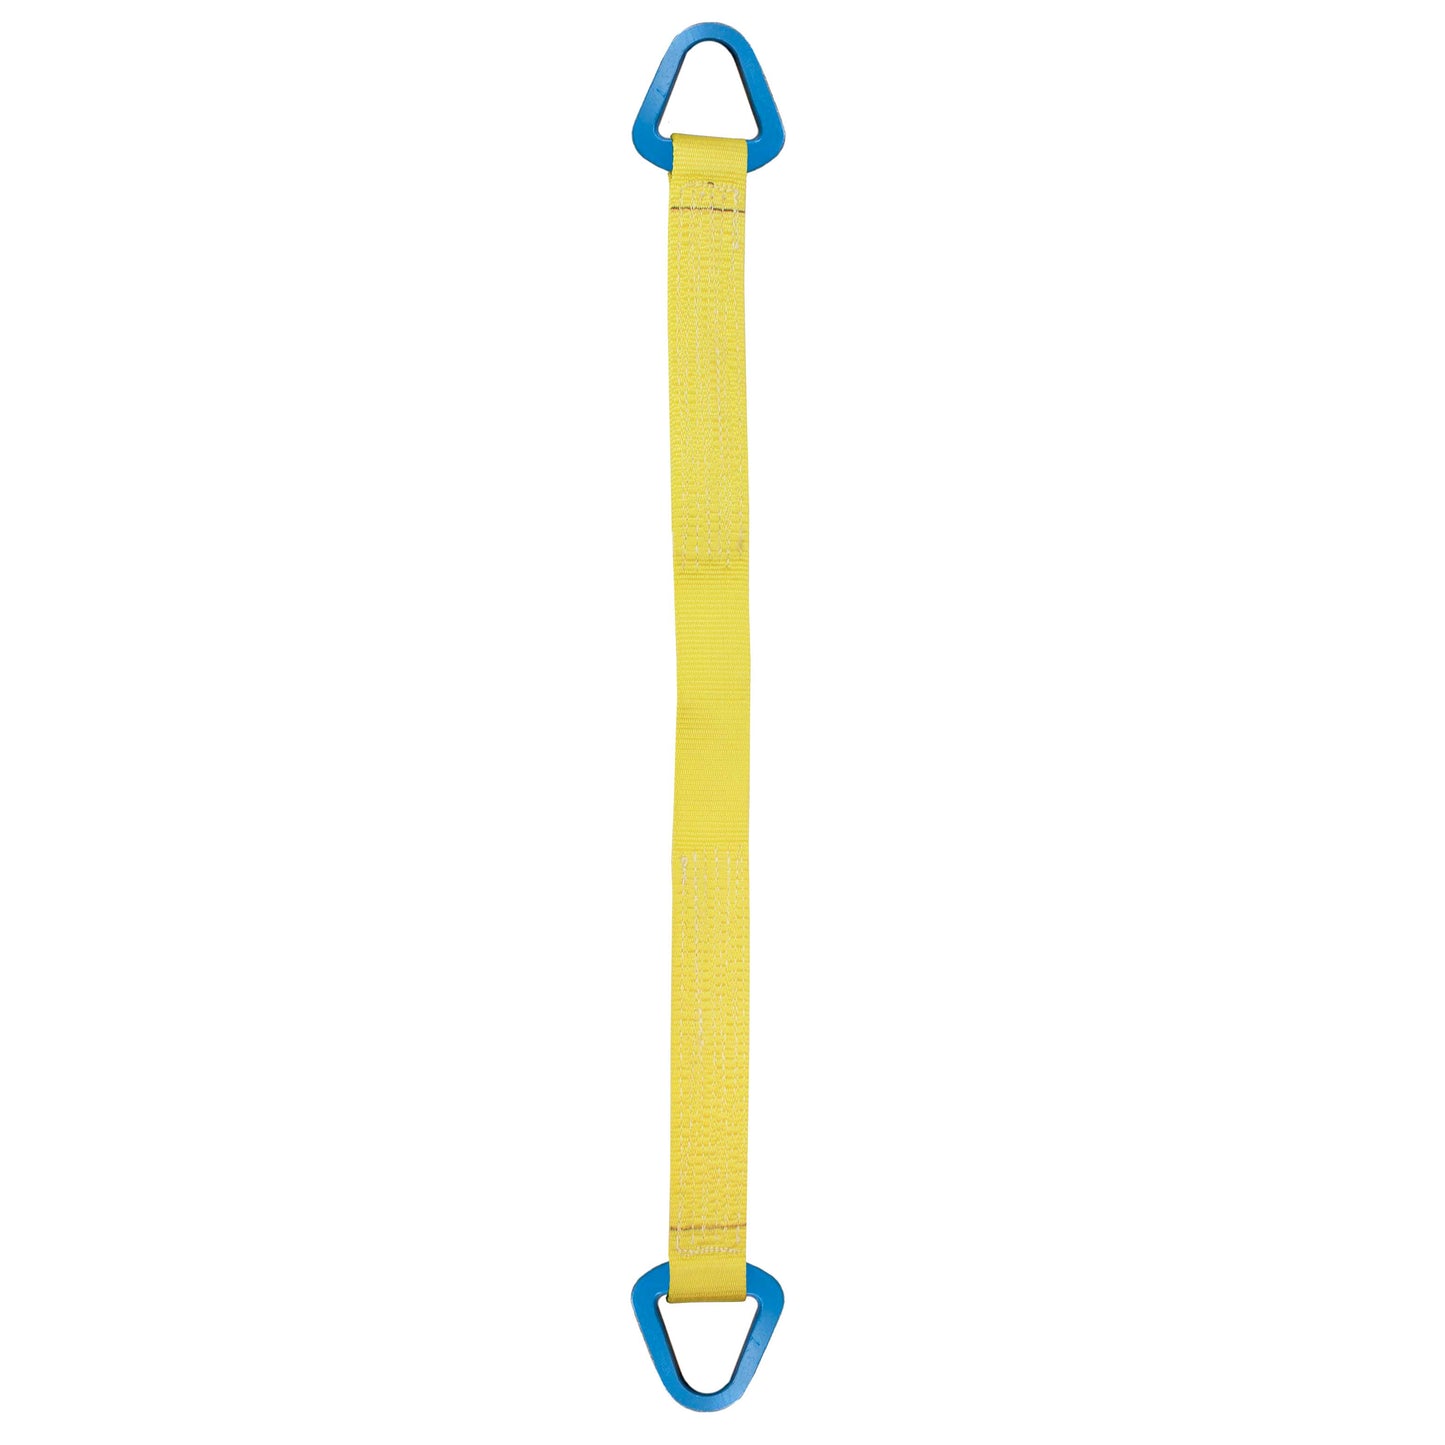 Nylon Lifting Sling Triangle 8 inch x 20 foot 1ply image 1 of 2